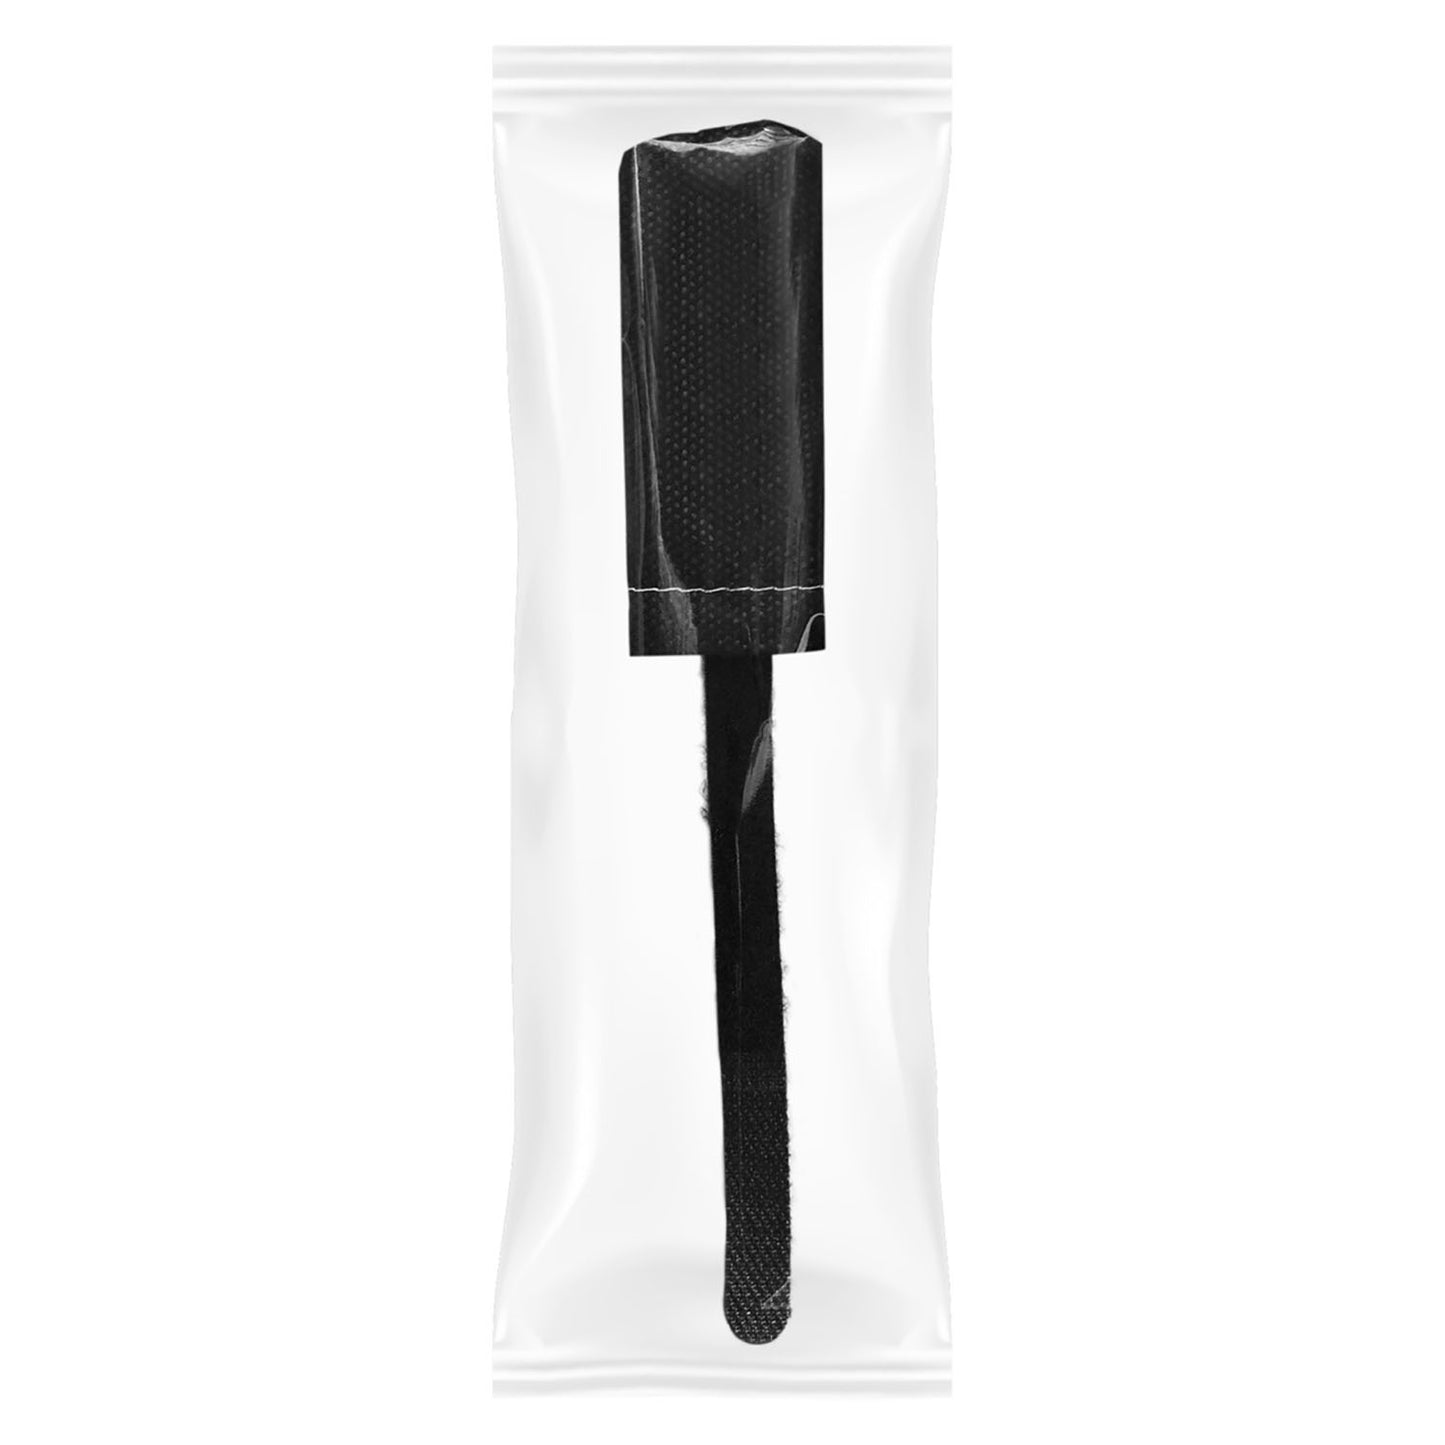 HygenX Sanitary Disposable Gooseneck Microphone Covers with Velcro Strap - 100 covers